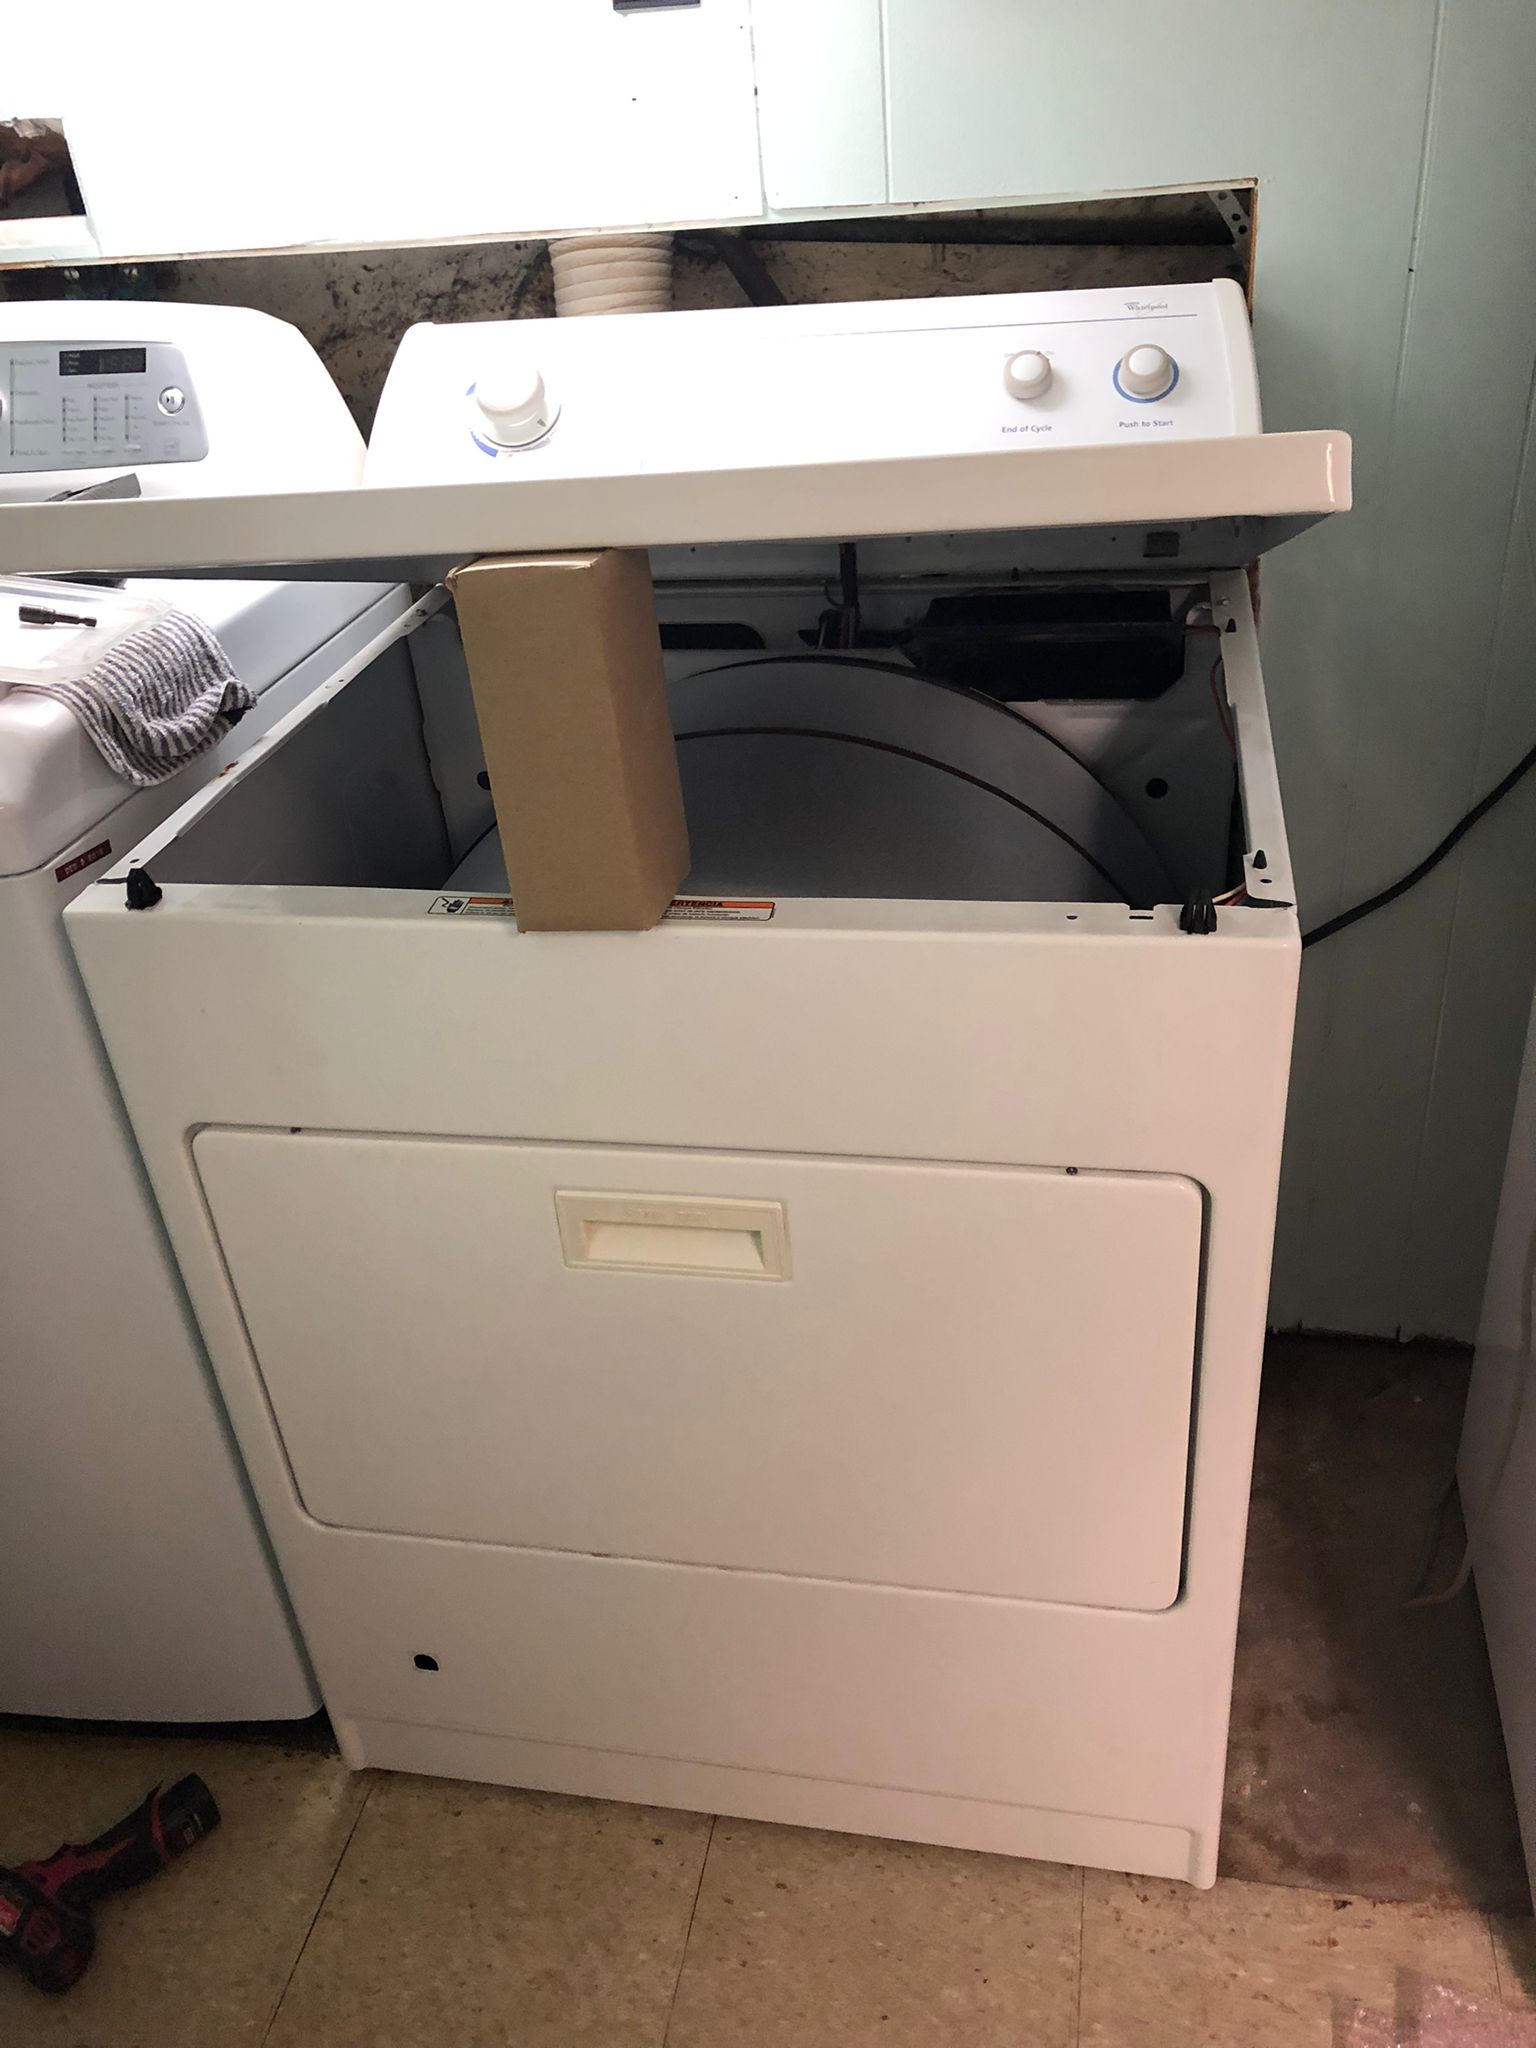 Dryer maintenance and cleaning instructions